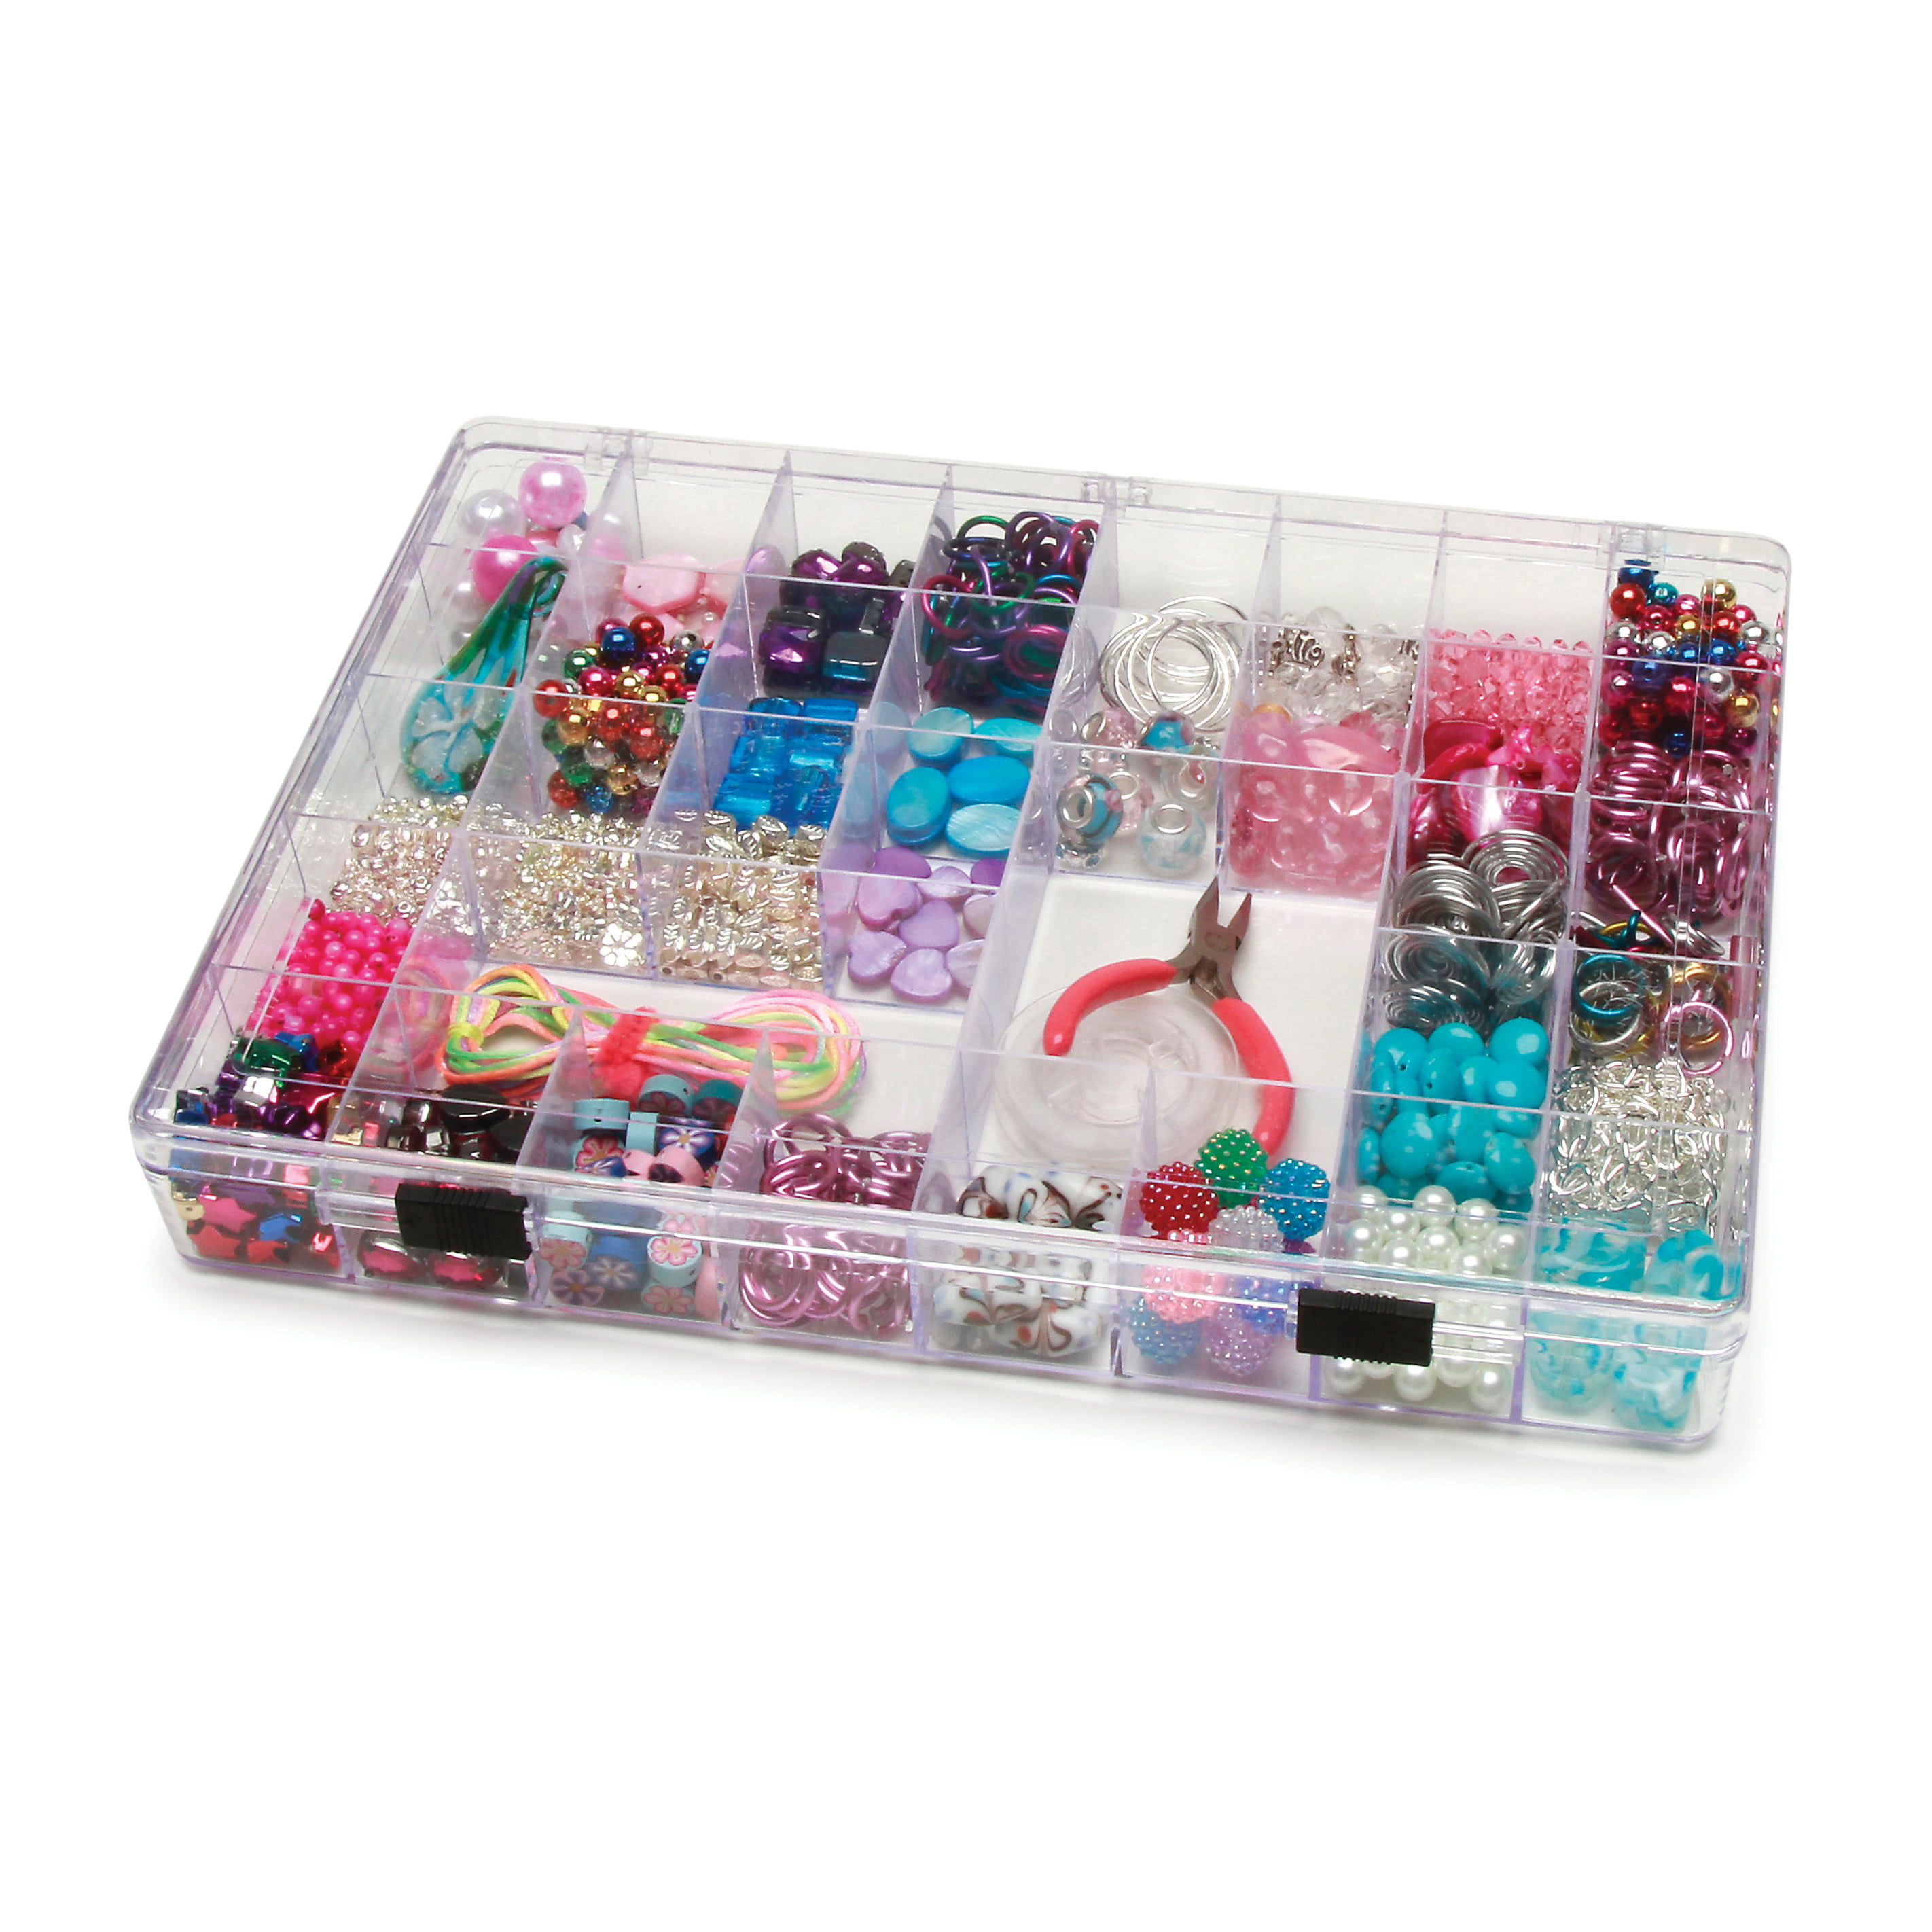 How to Organize Beads: 35 Bead Storage Tips and Tricks